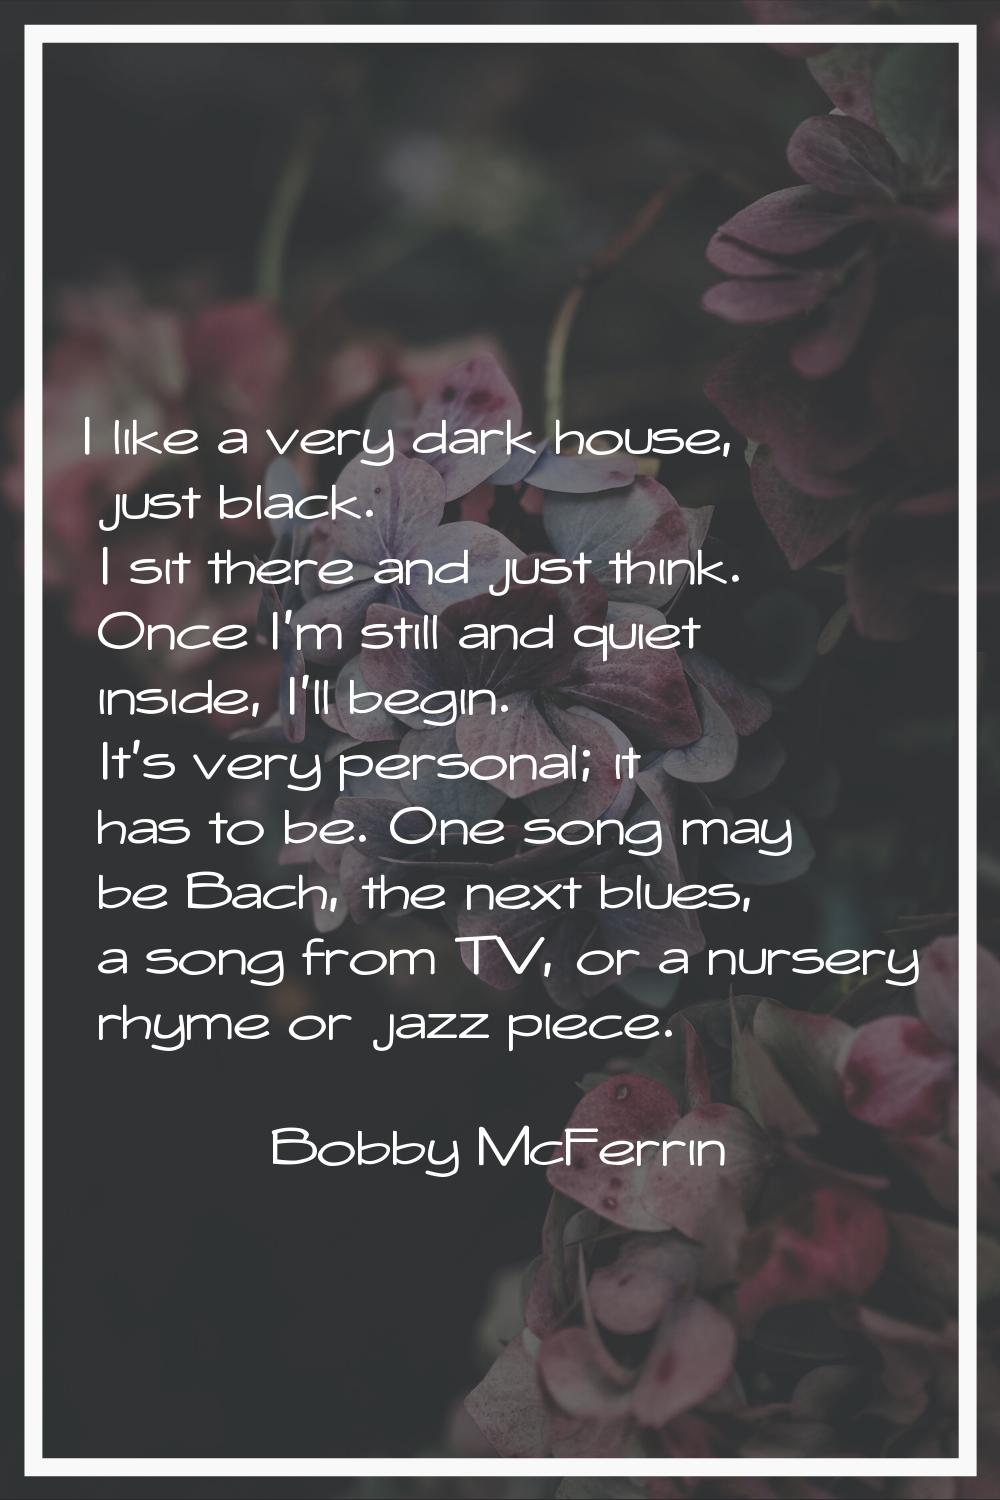 I like a very dark house, just black. I sit there and just think. Once I'm still and quiet inside, 